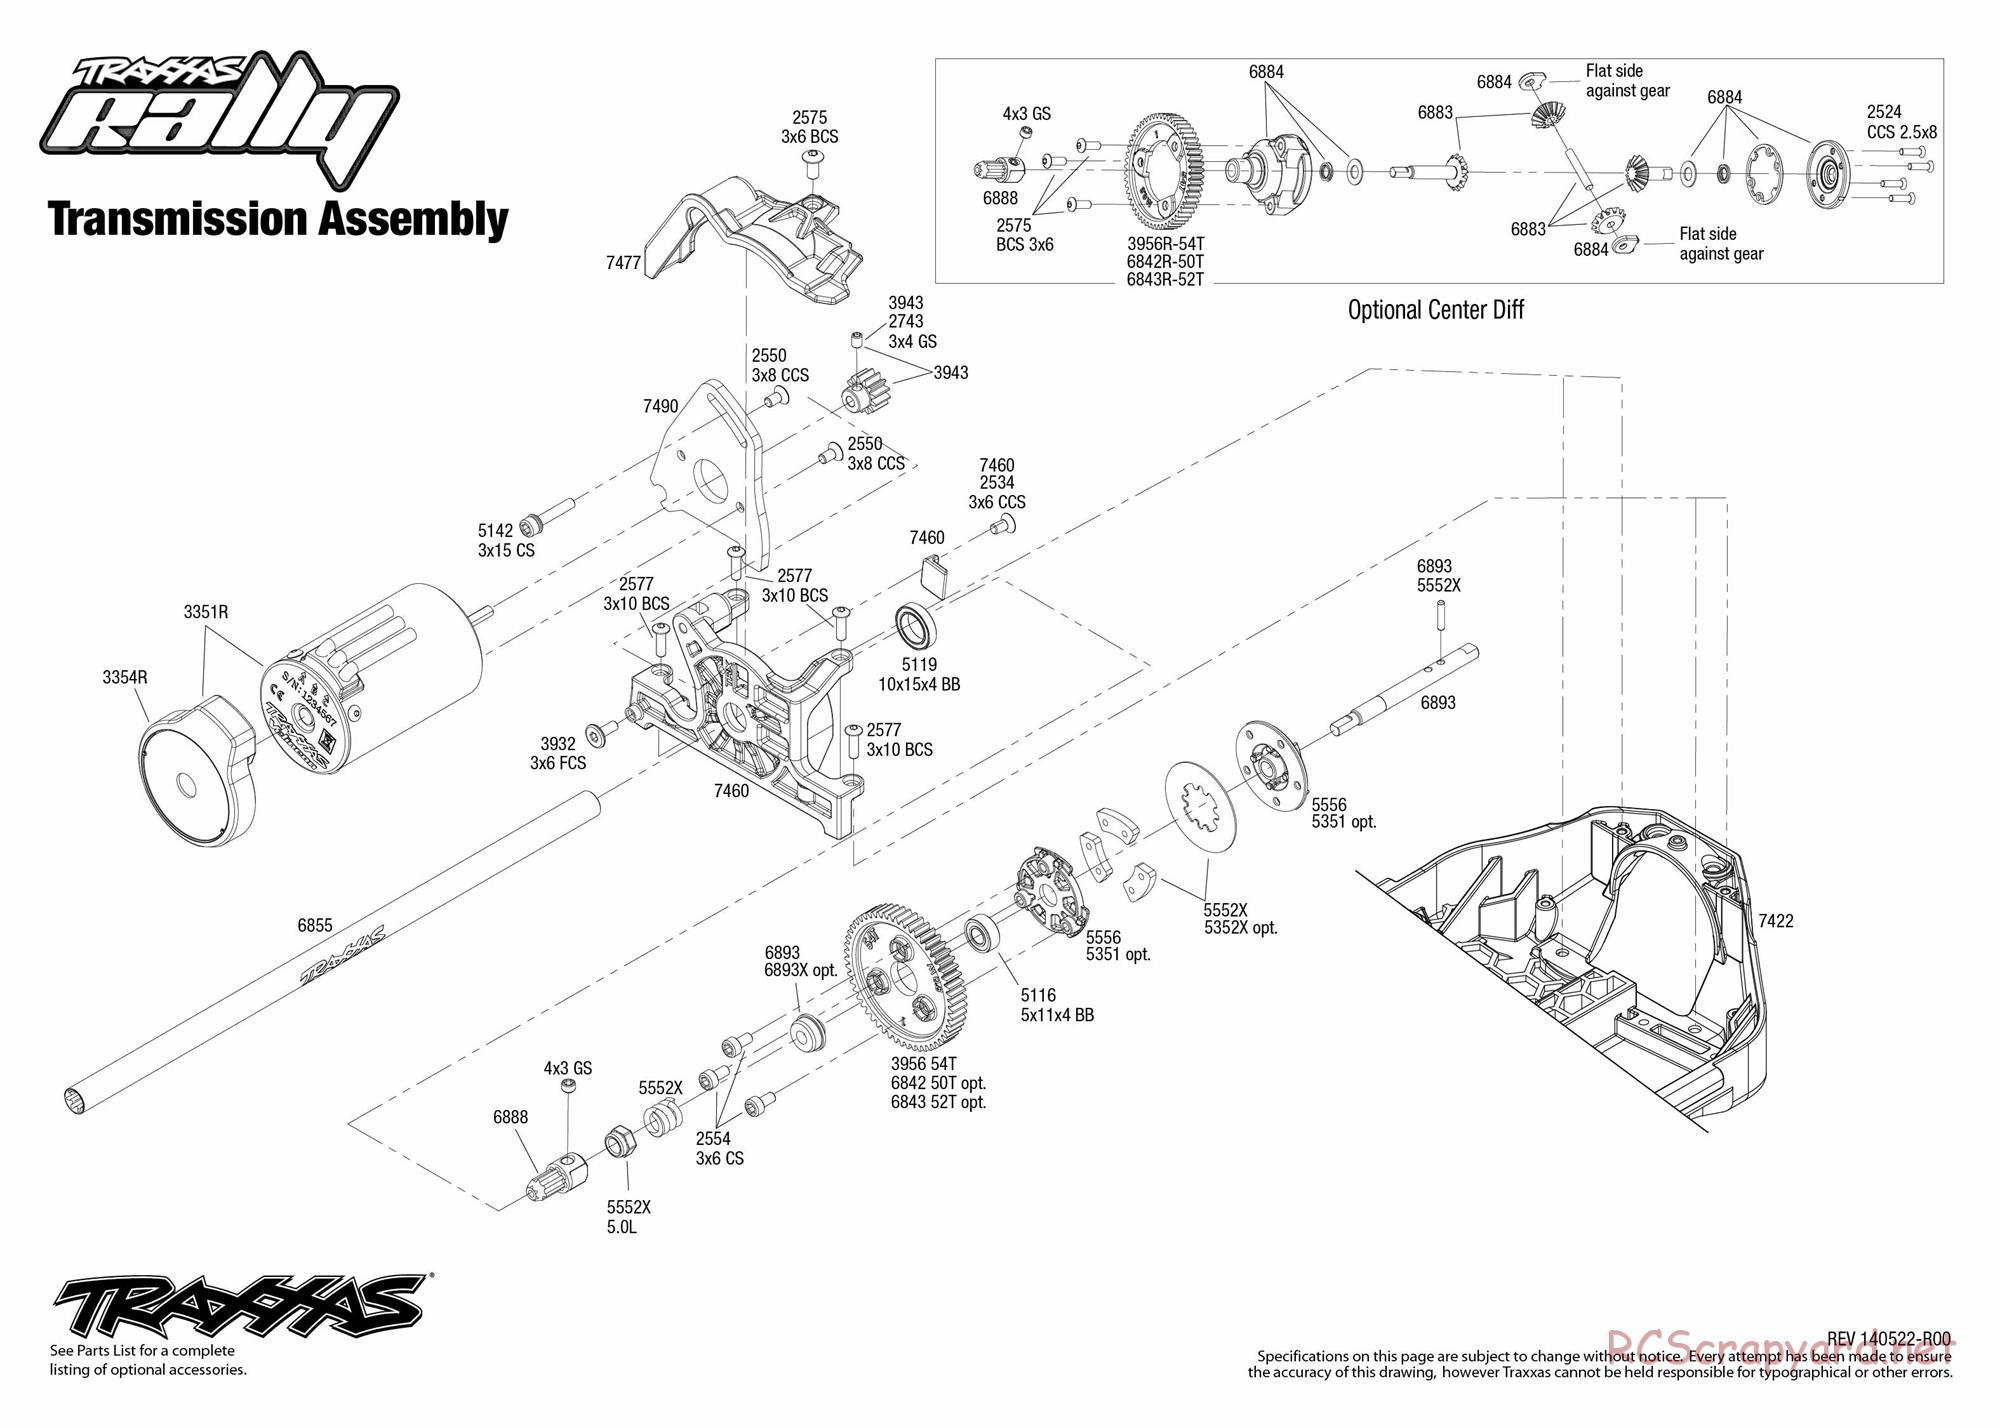 Traxxas - Rally (2014) - Exploded Views - Page 5